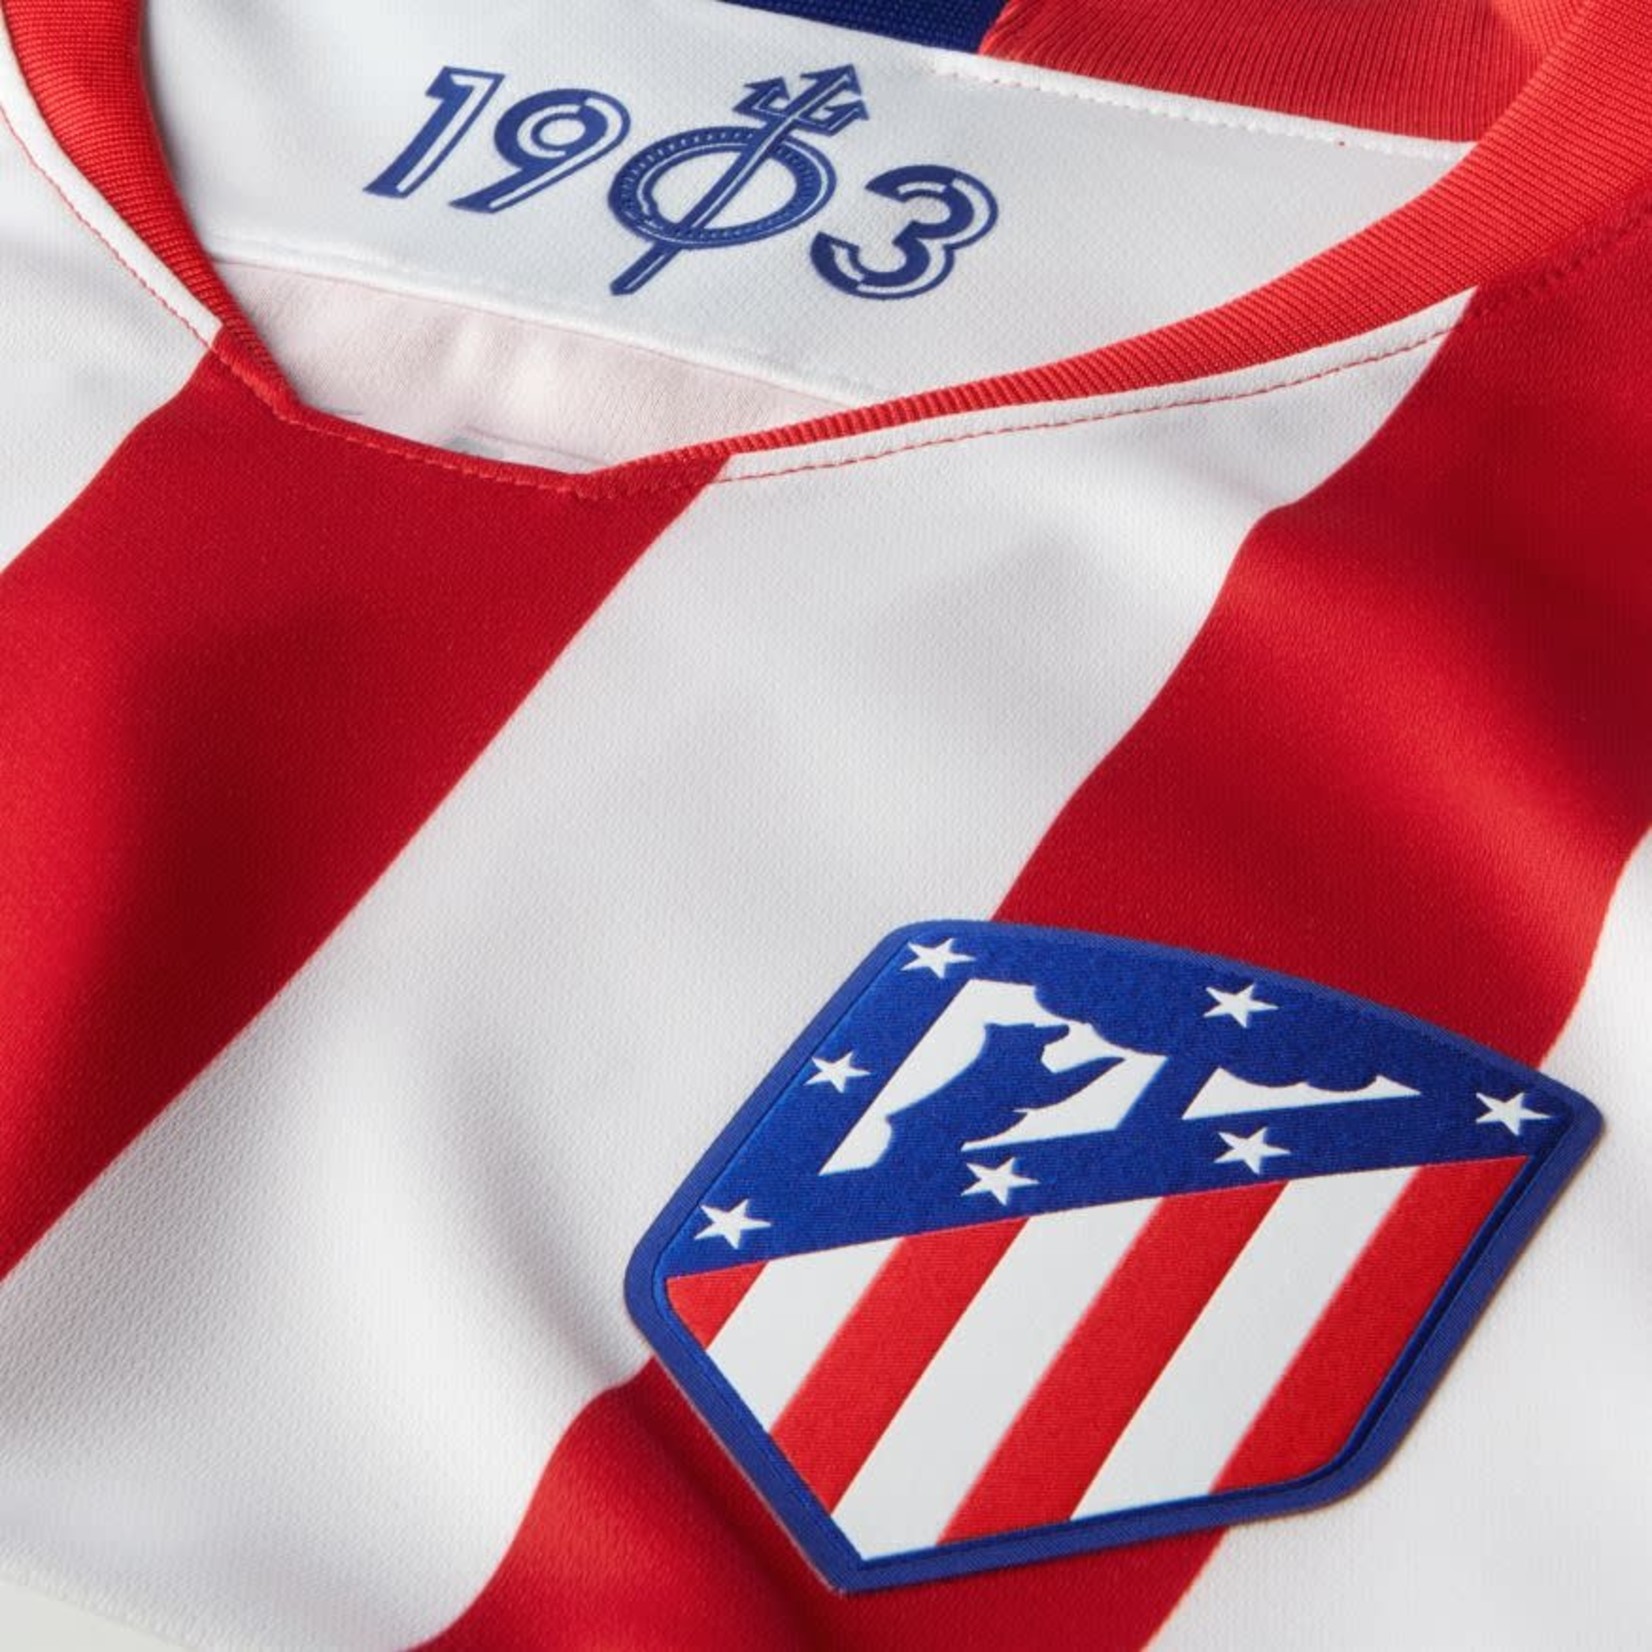 NIKE ATLETICO MADRID 19/20 HOME JERSEY